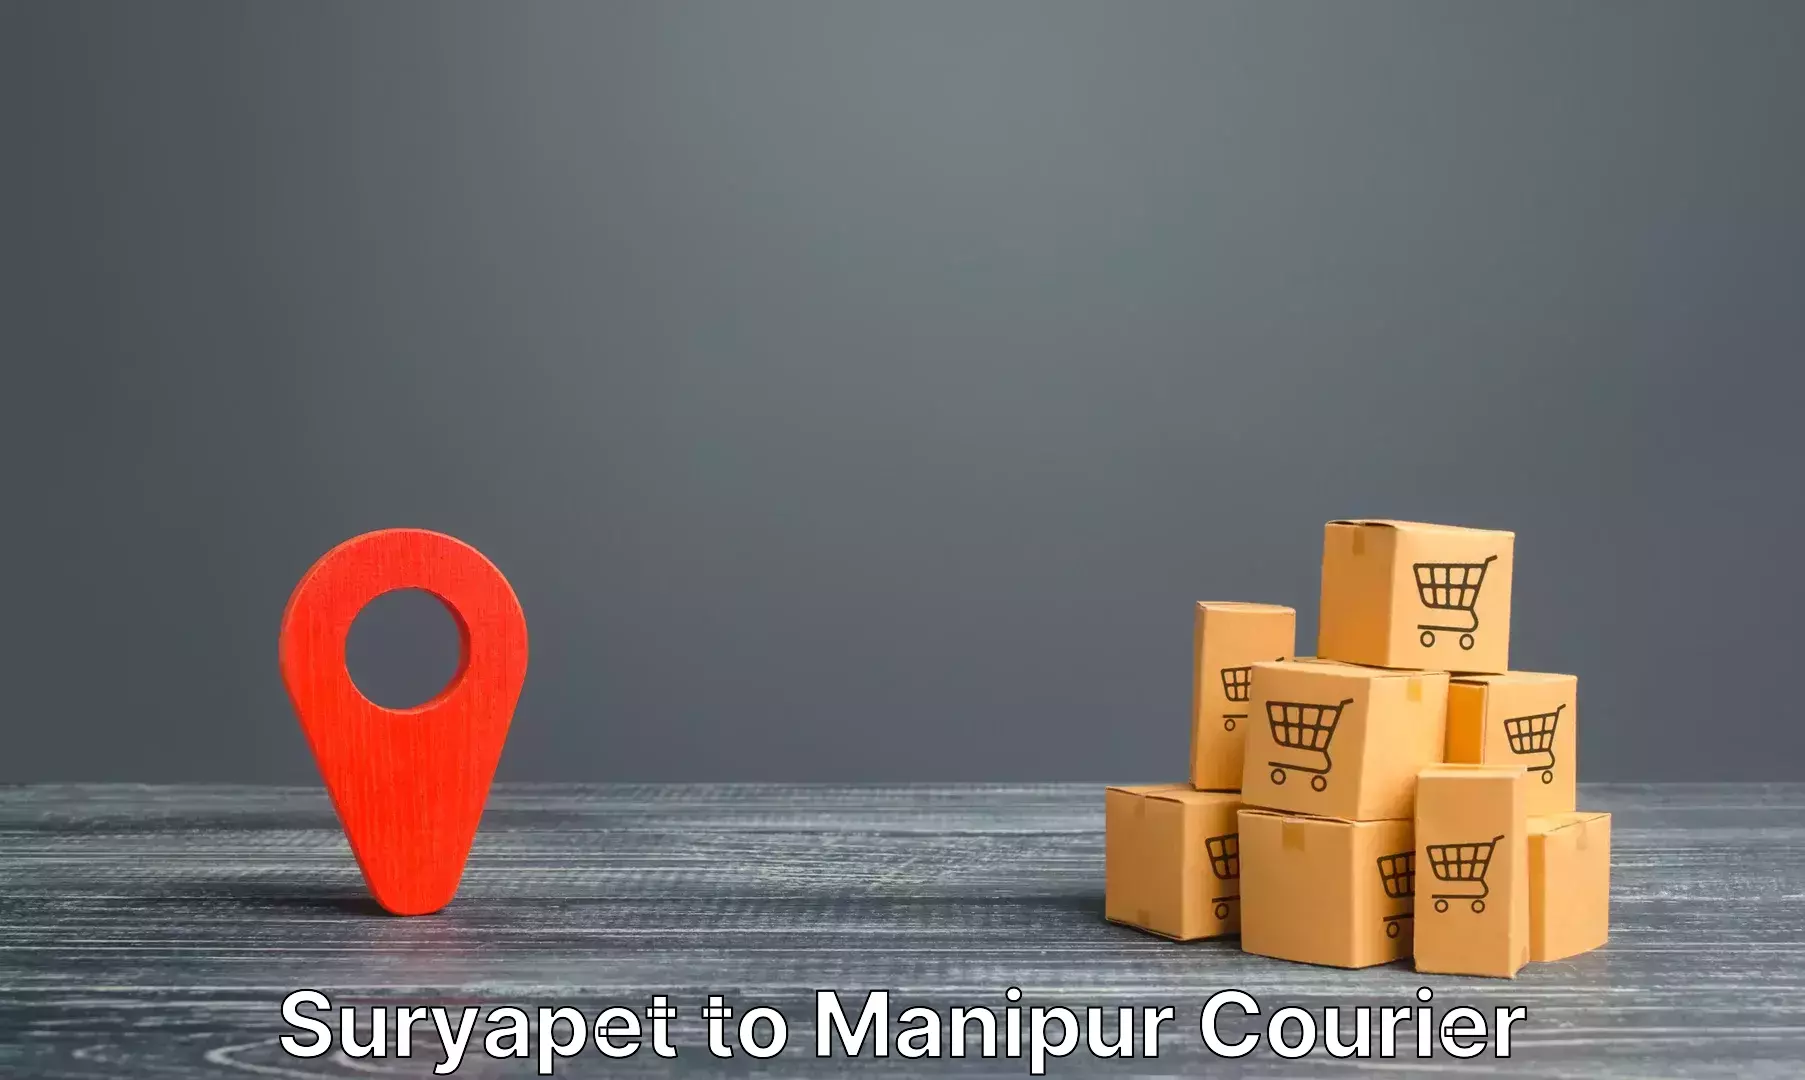 Luggage transport consultancy Suryapet to Manipur